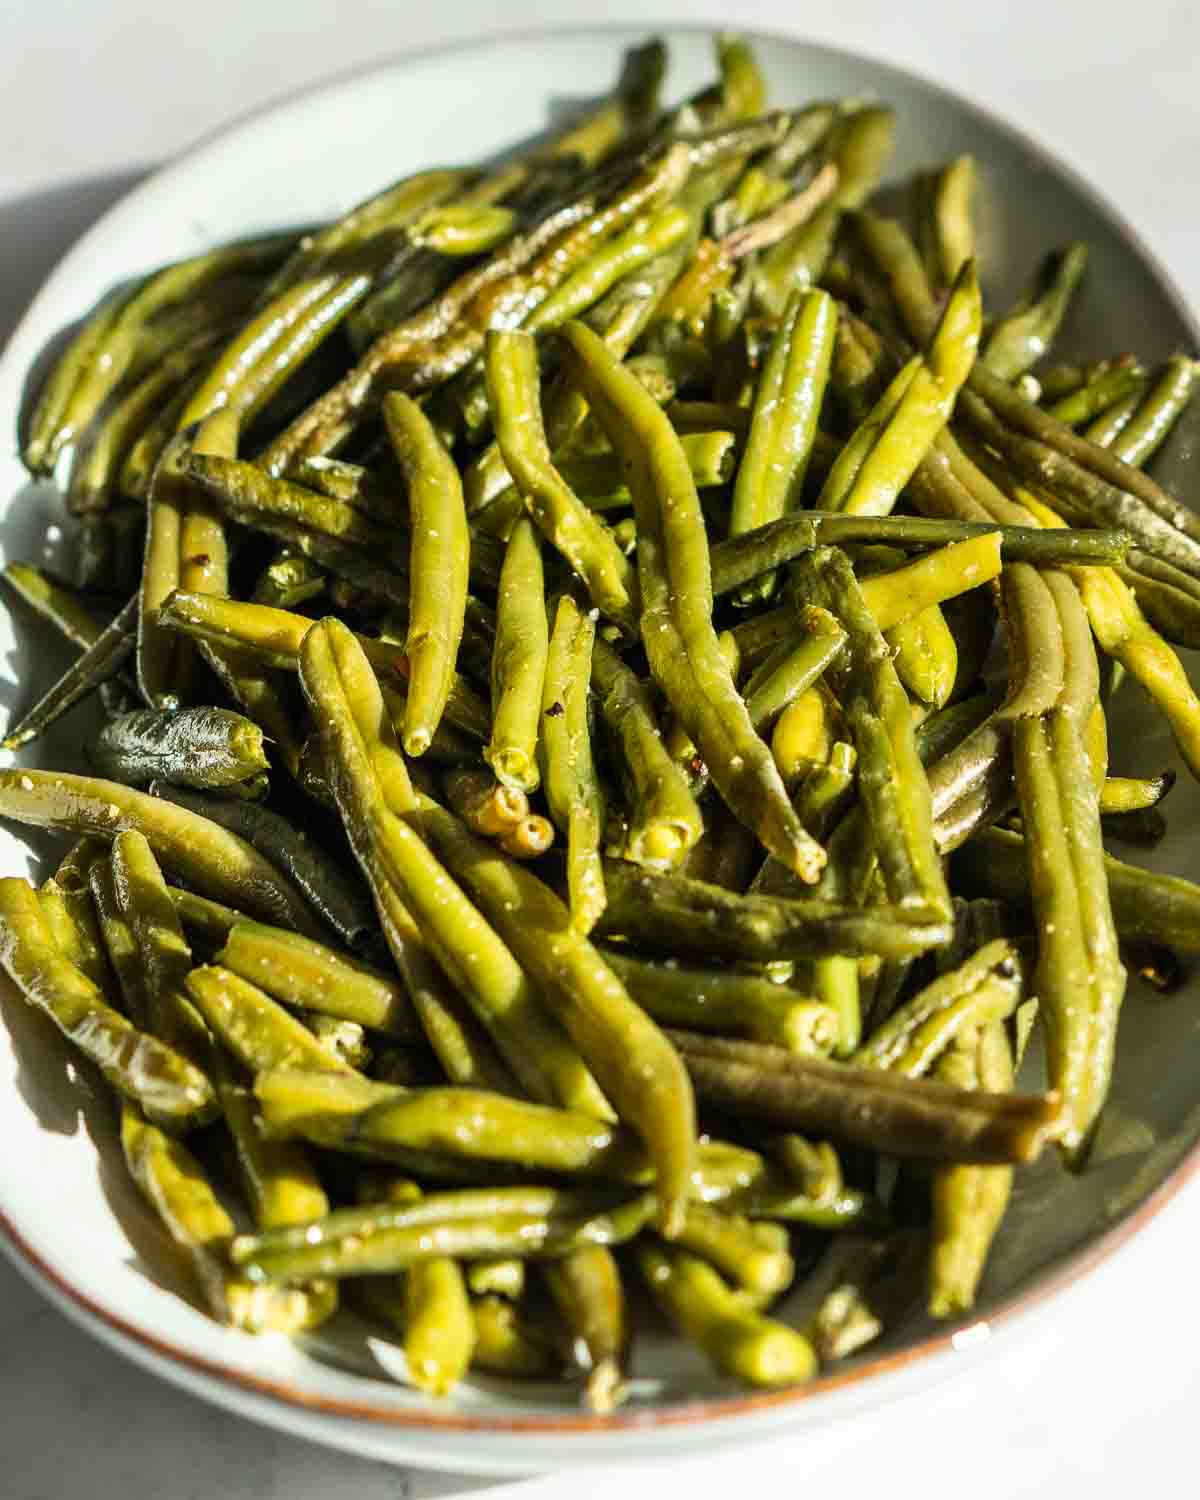 roasted green beans on a plate.